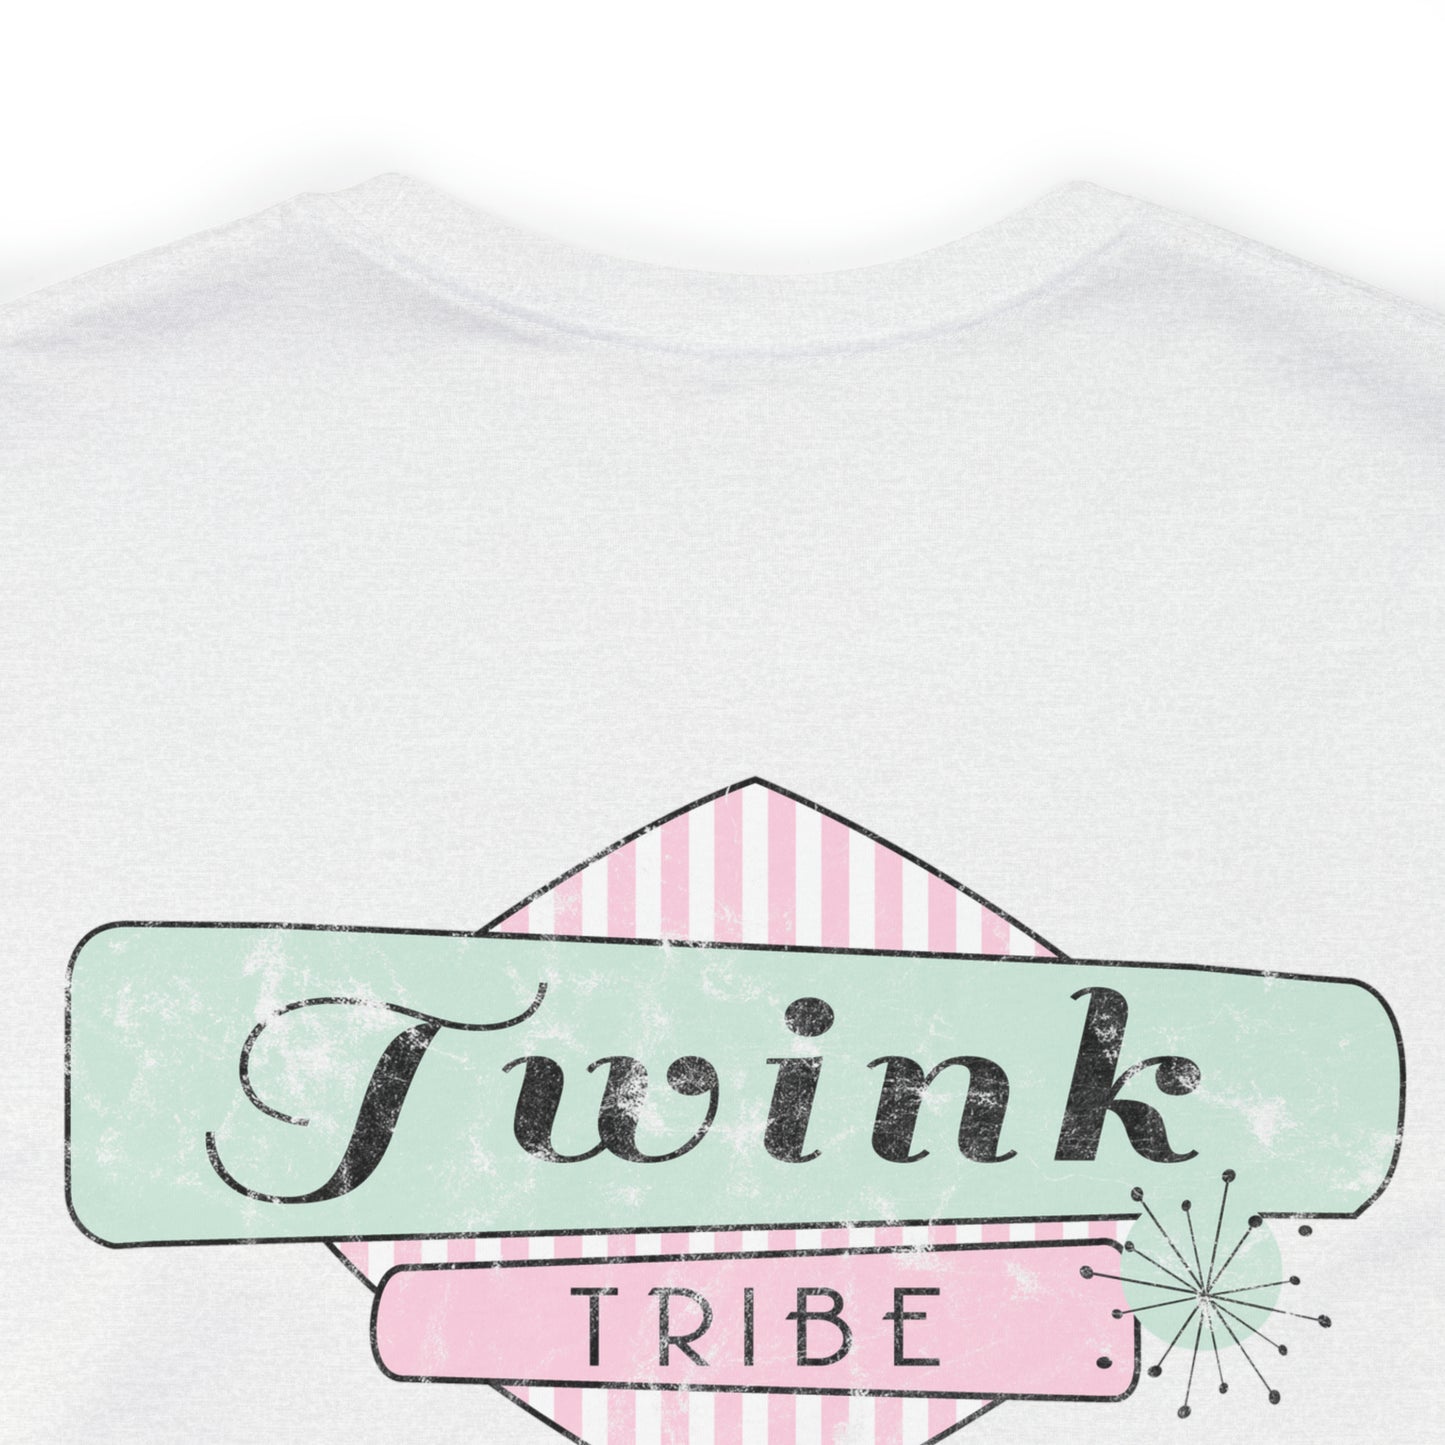 My Twink 50s Diner T-Shirt